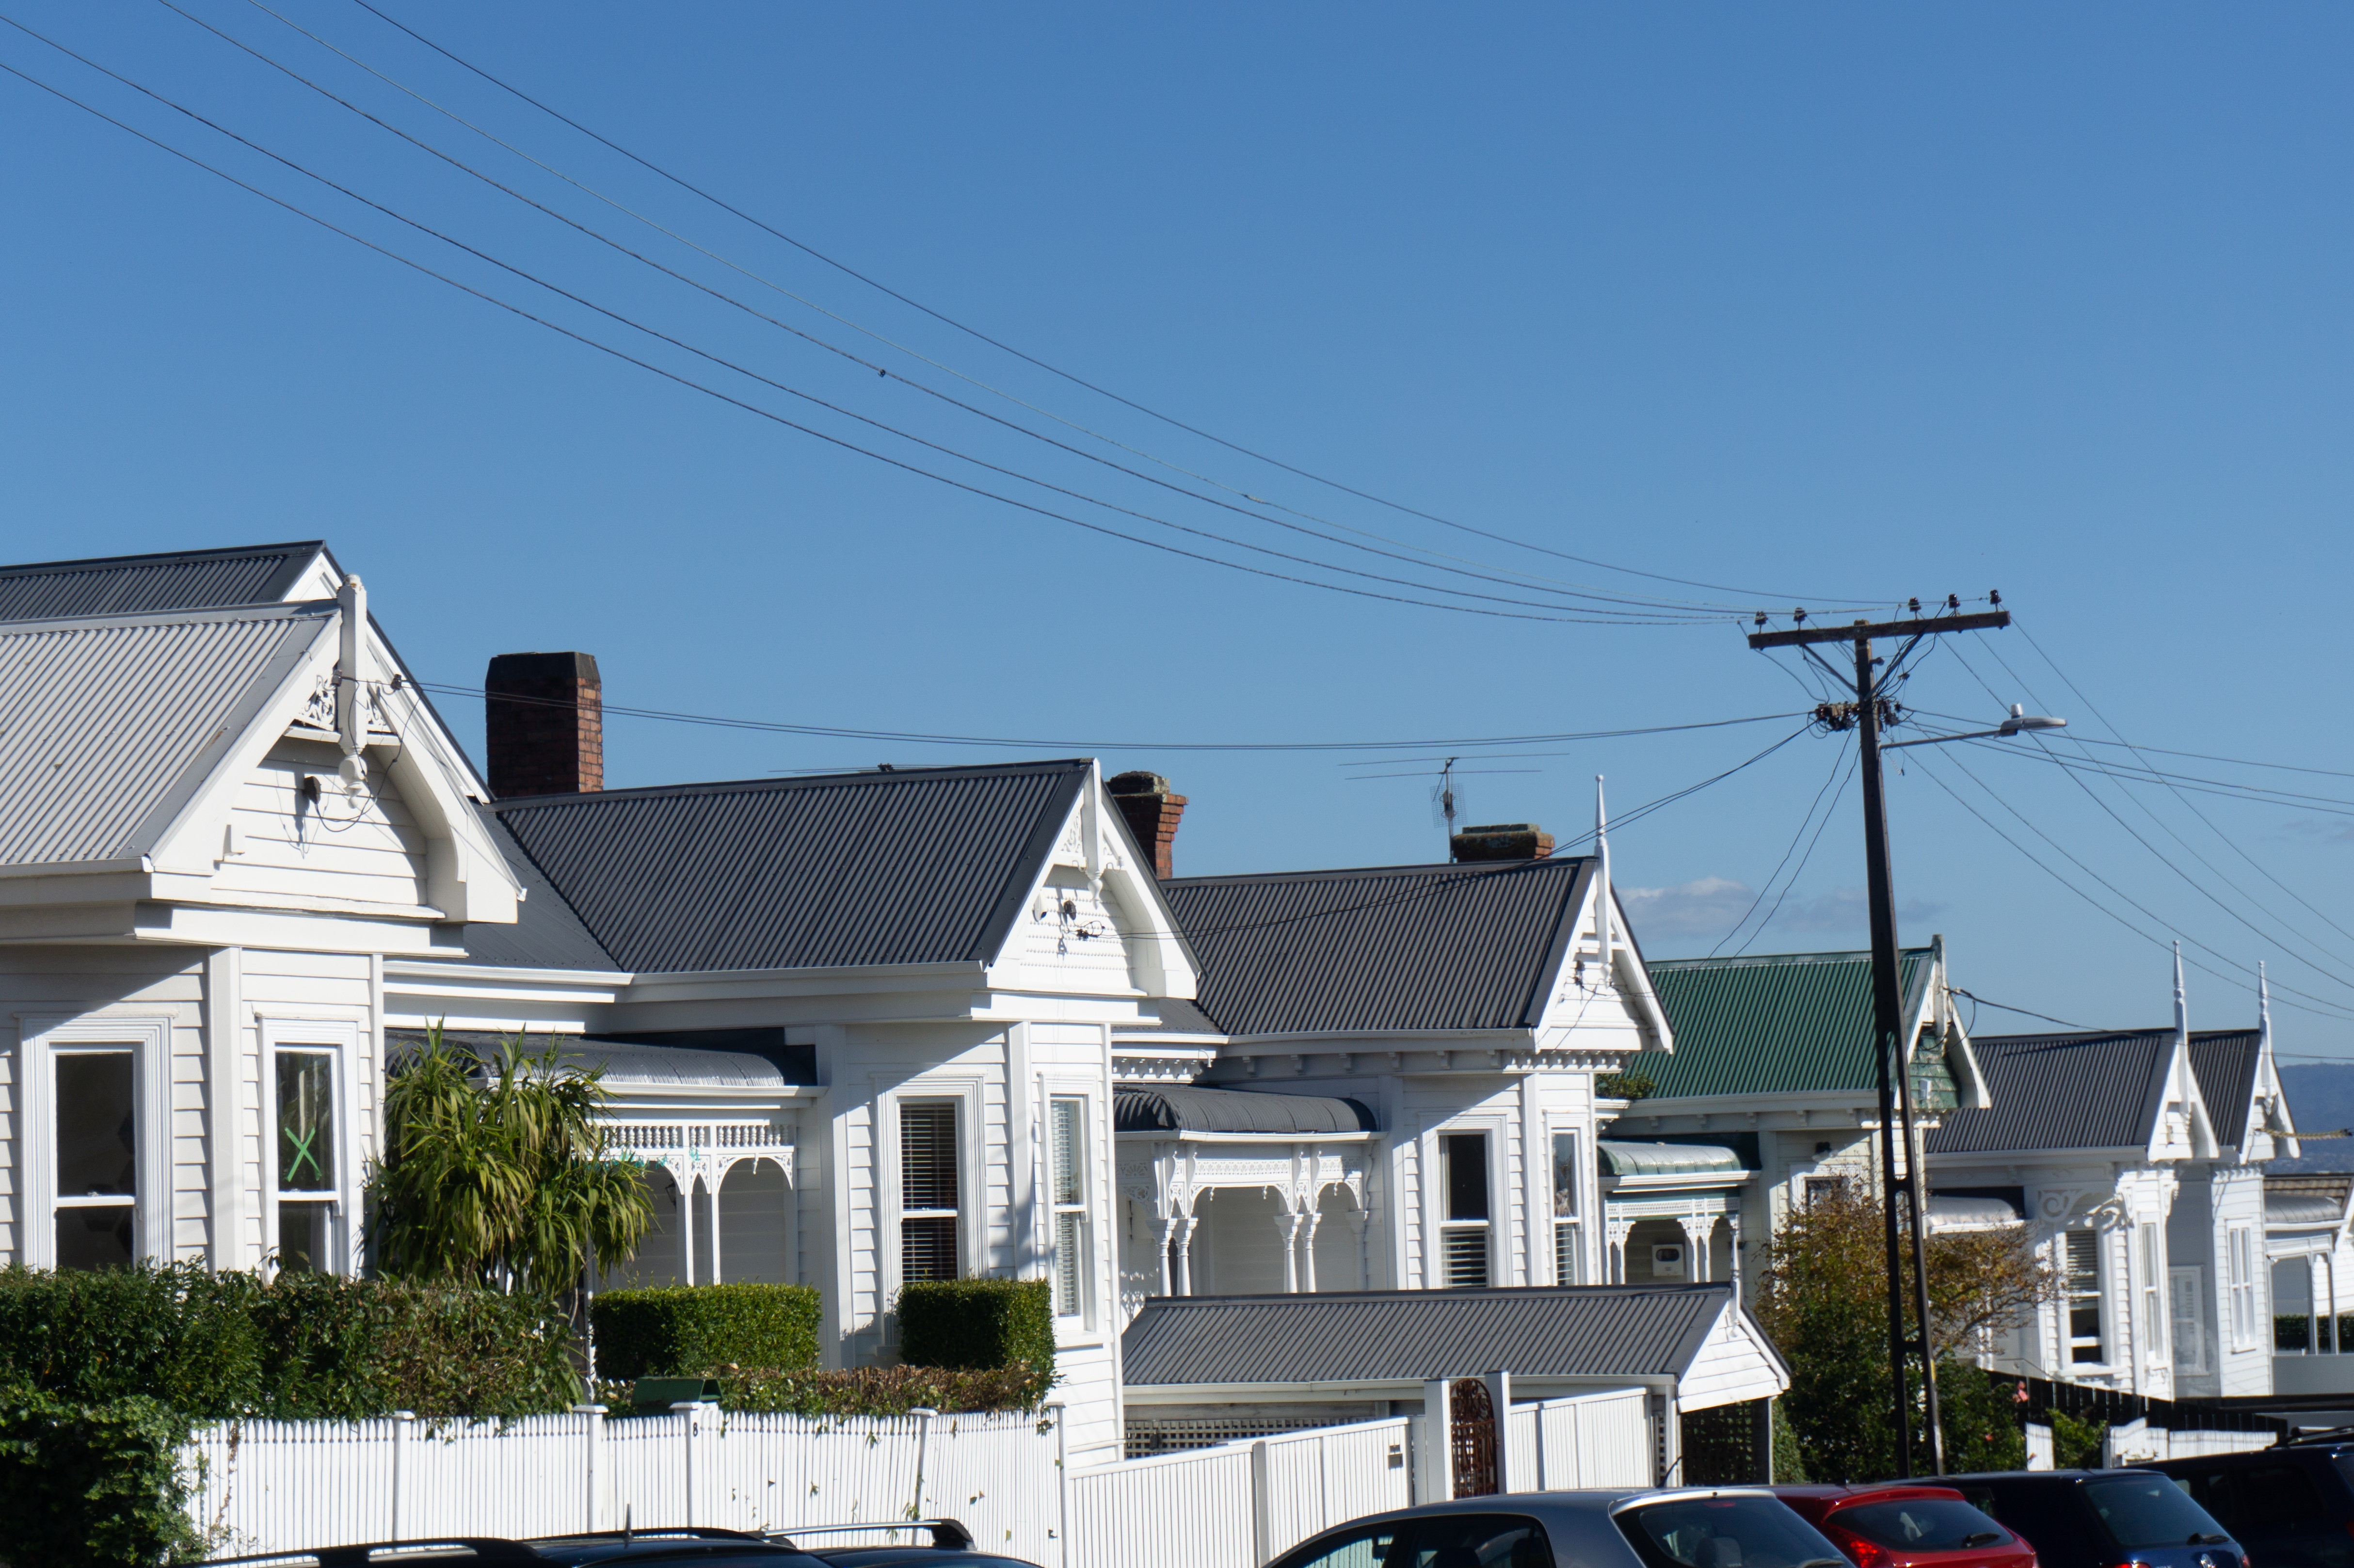 White villas with grey roofs in NZ